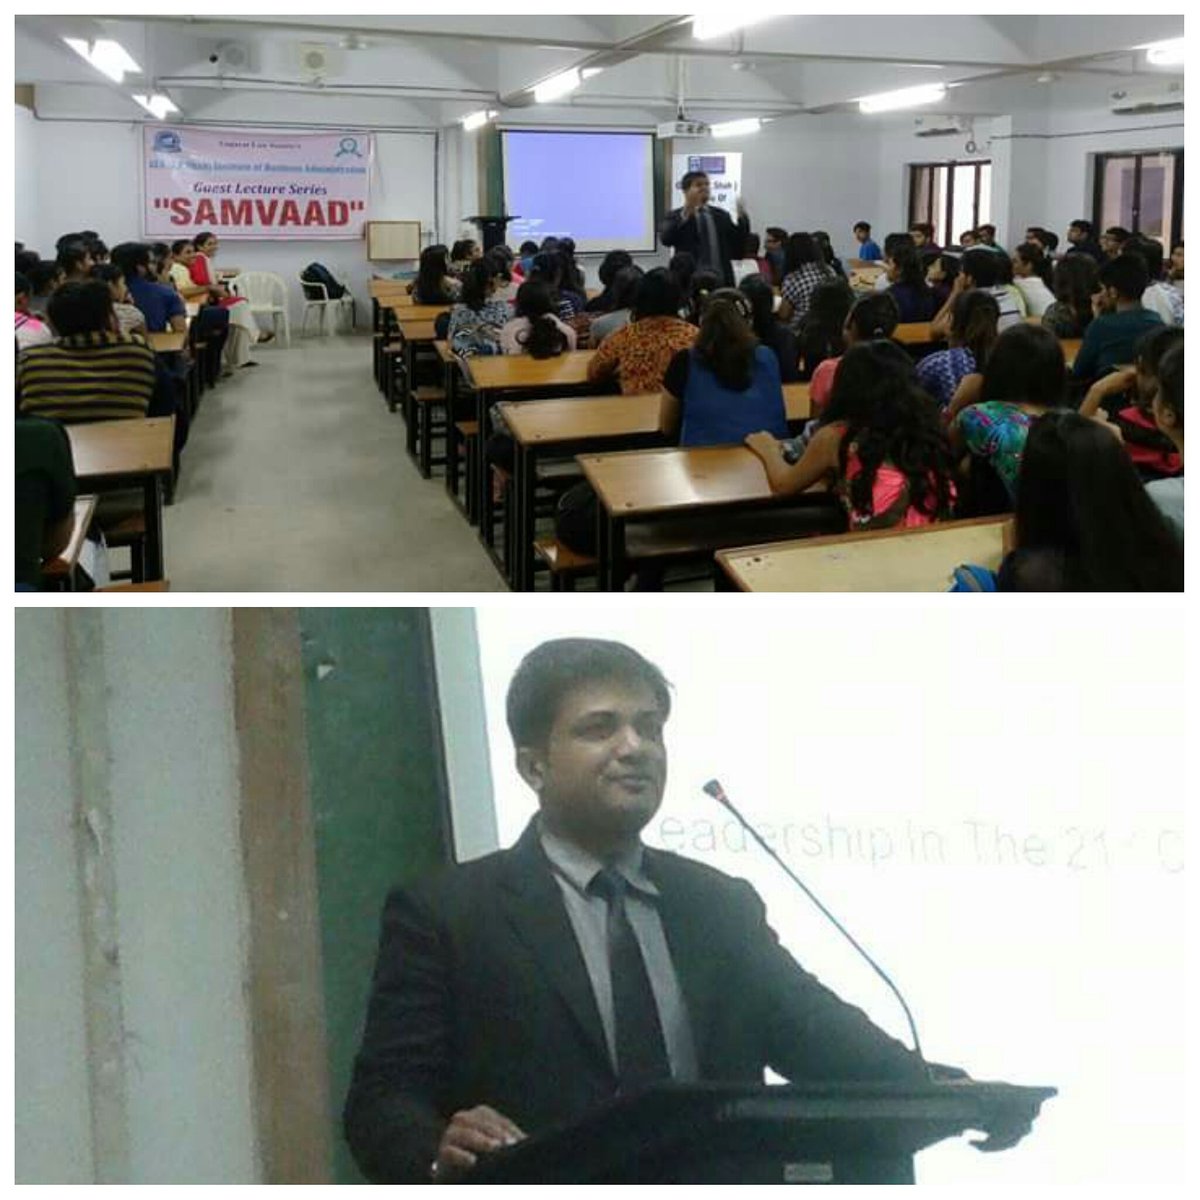 Speech#LEADERSHIP#Management Students#SAMVAAD#GuestLectureSeries Organized By GLS (J P Shah) Inst.of Mgt. A'Bad.